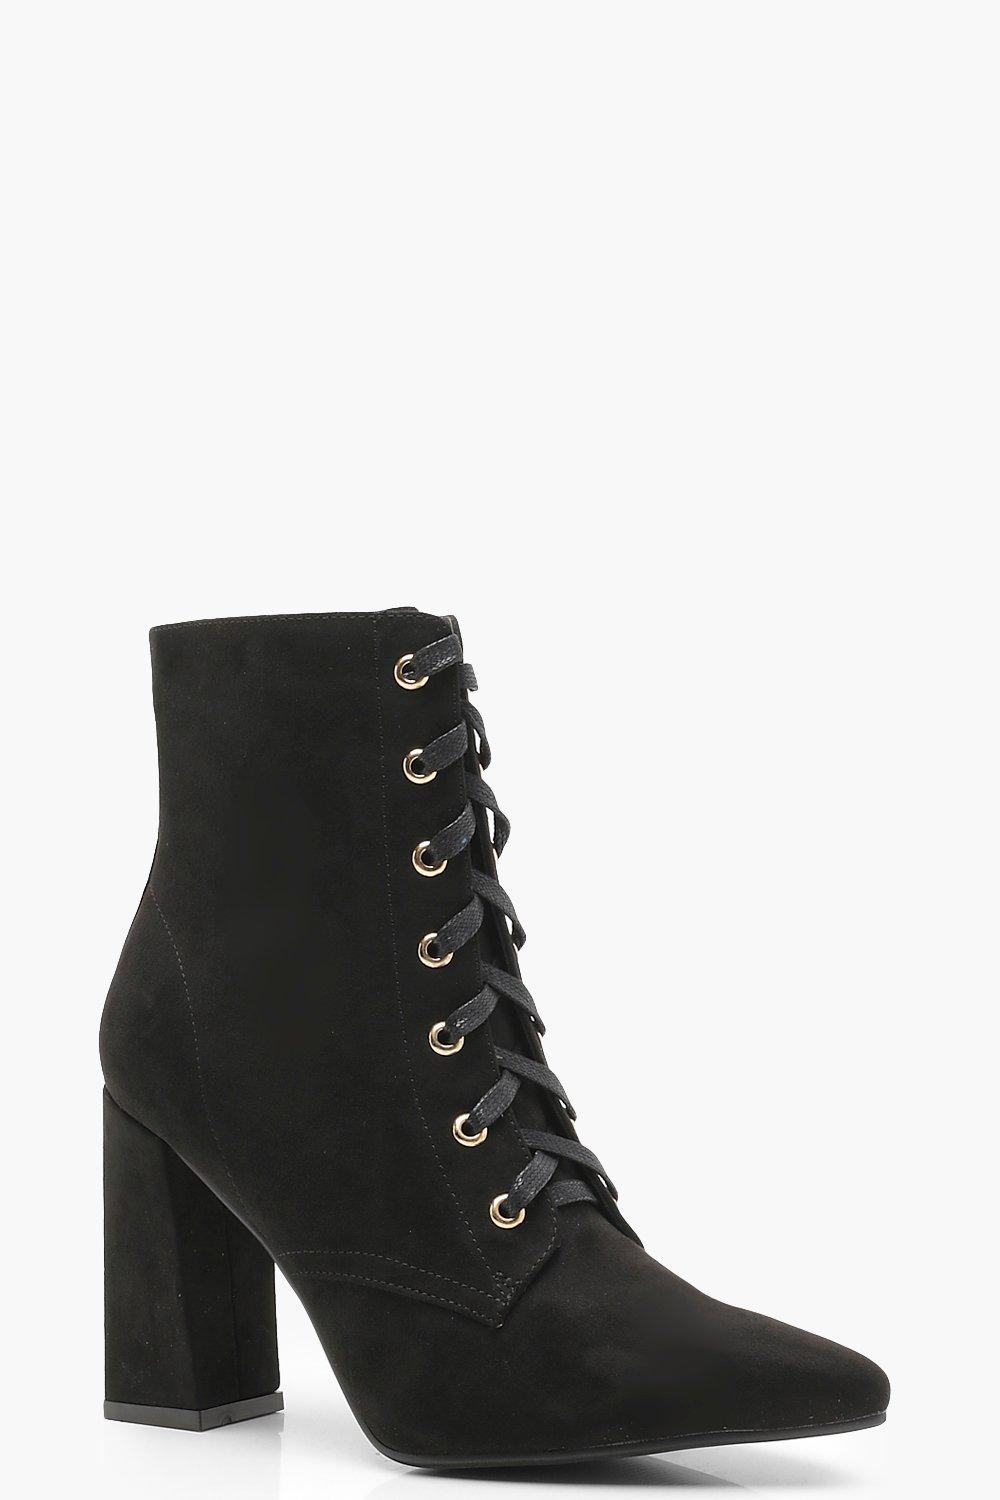 Lace Up Pointed Toe Ankle Shoe Boots 